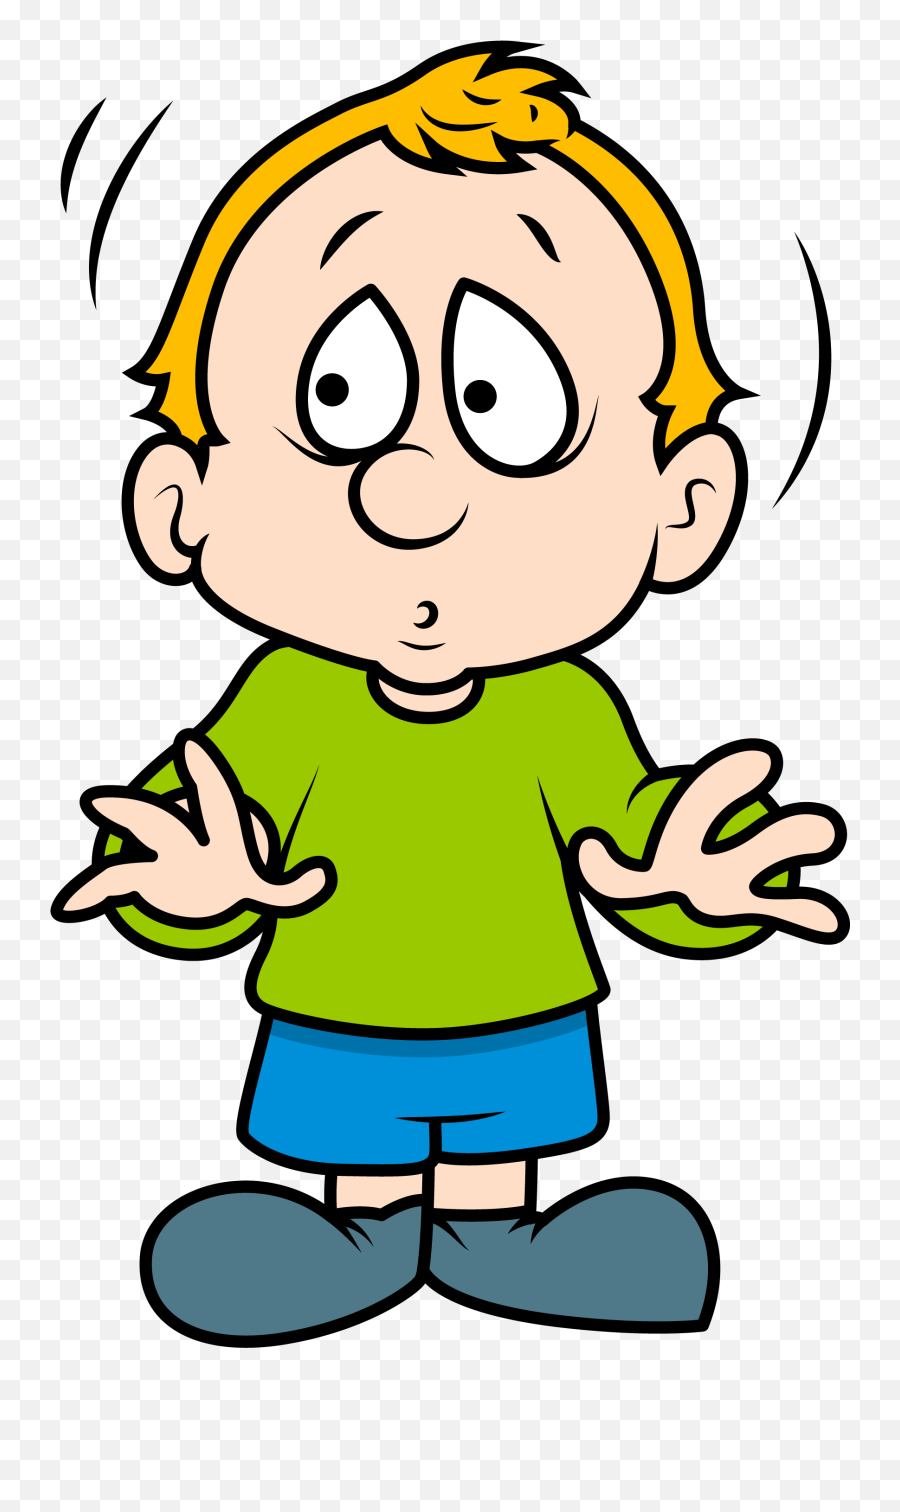 Emotions Clipart Emotional Person Emotions Emotional Person - Scared Cartoon Boy Emoji,Cartoon About Emotions